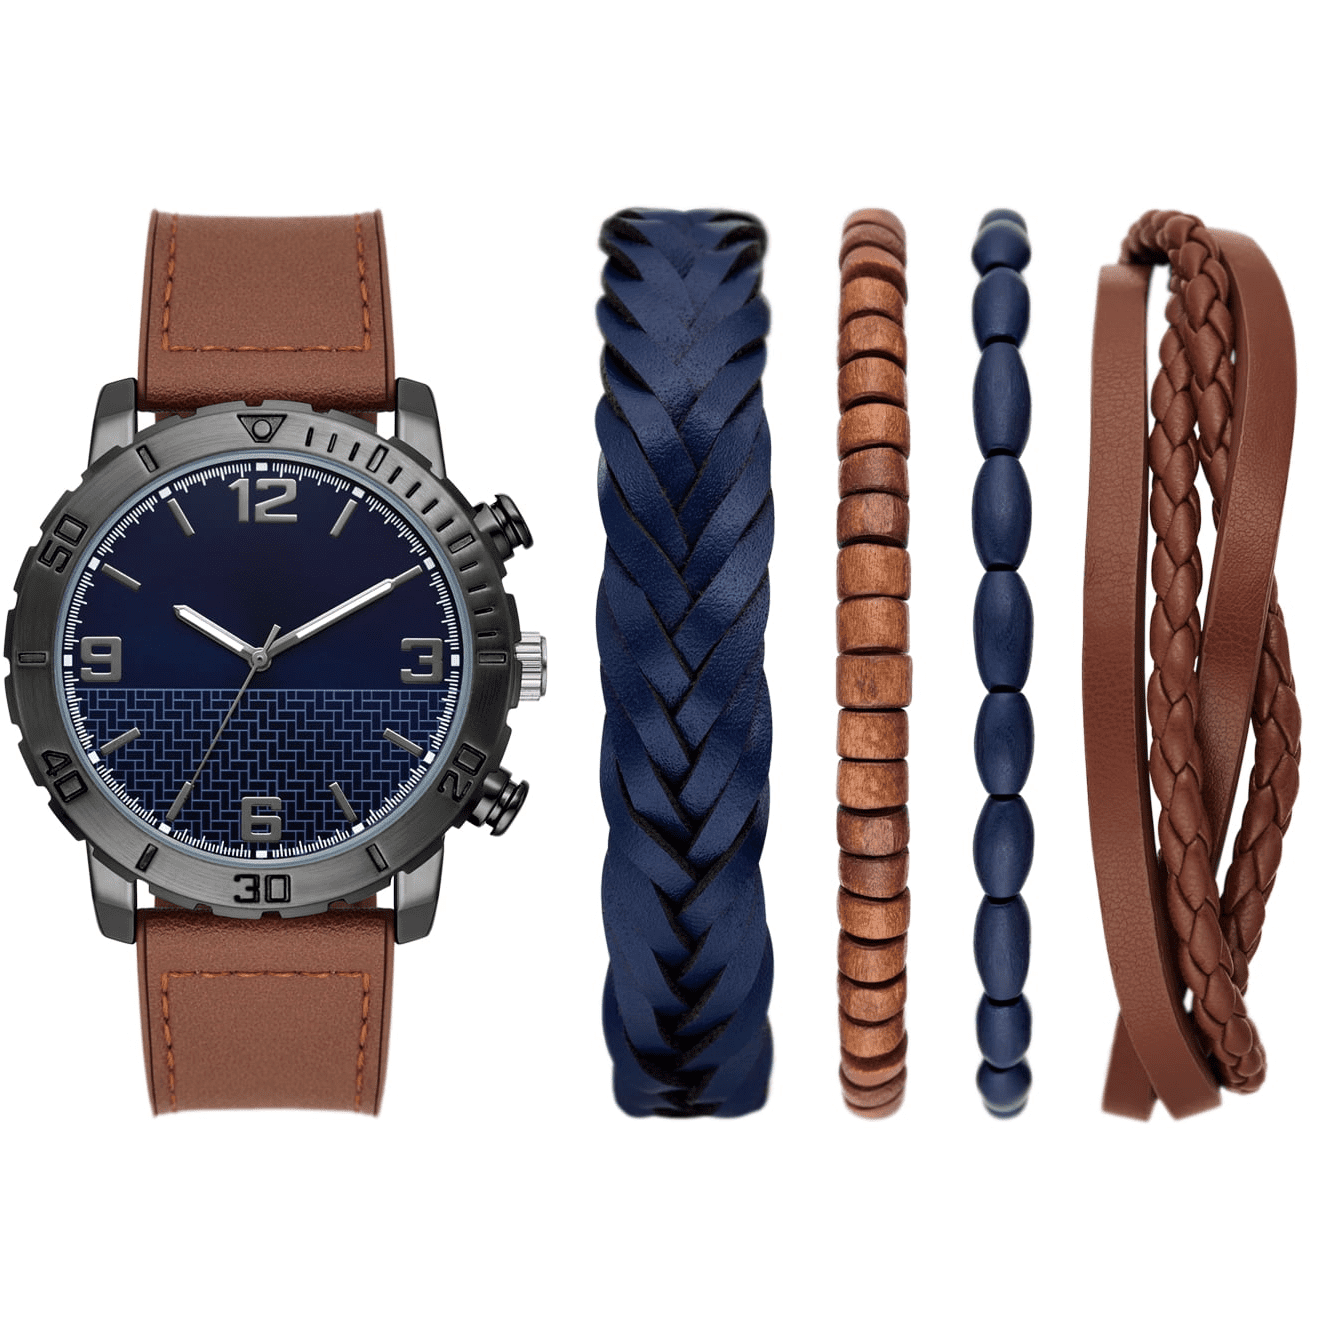 Men's Watch and 3 Bracelets Set | Beaded Bracelet, Leather Wristband  Bangle, and Braided Bracelet Strap, Brown Leather Band Wristwatch Date  Quartz Chronograph Watches for Men - Gift Set - Walmart.com